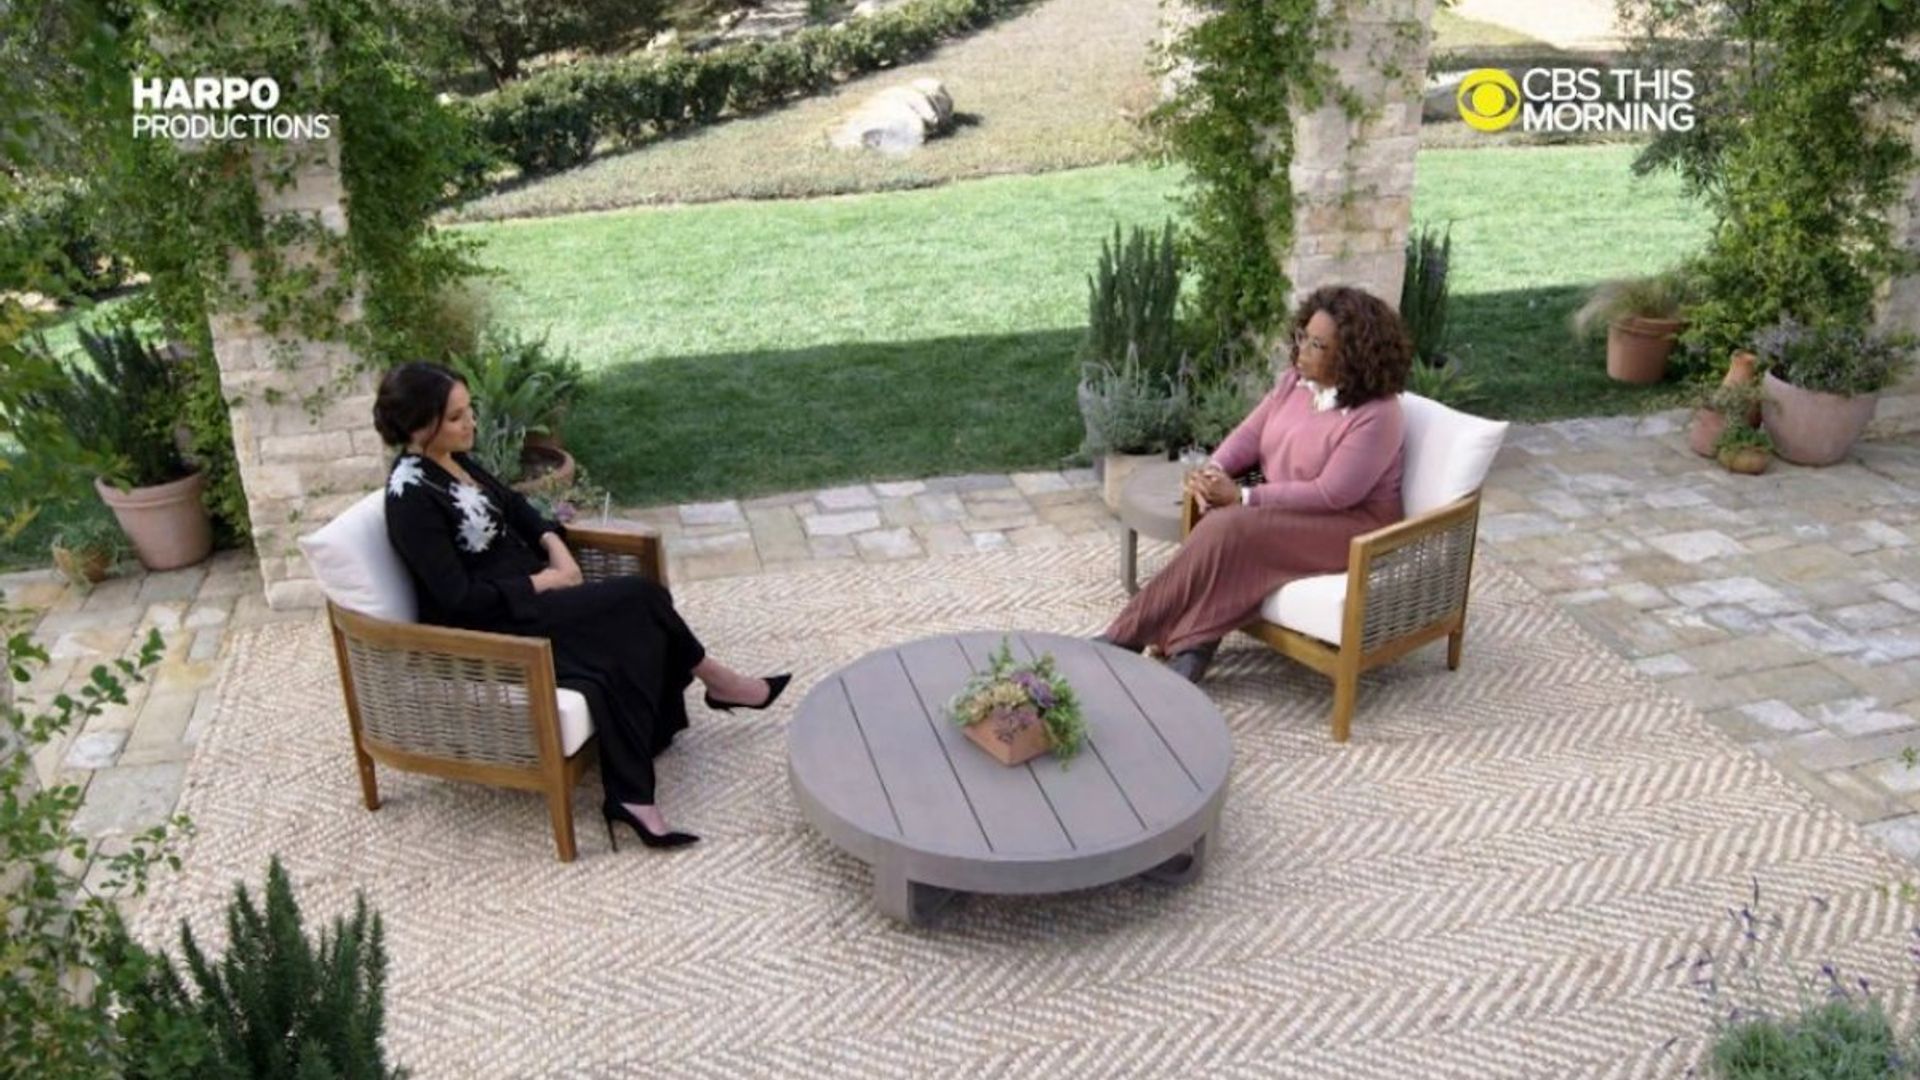 15 most surprising revelations from Prince Harry and Meghan's Oprah interview